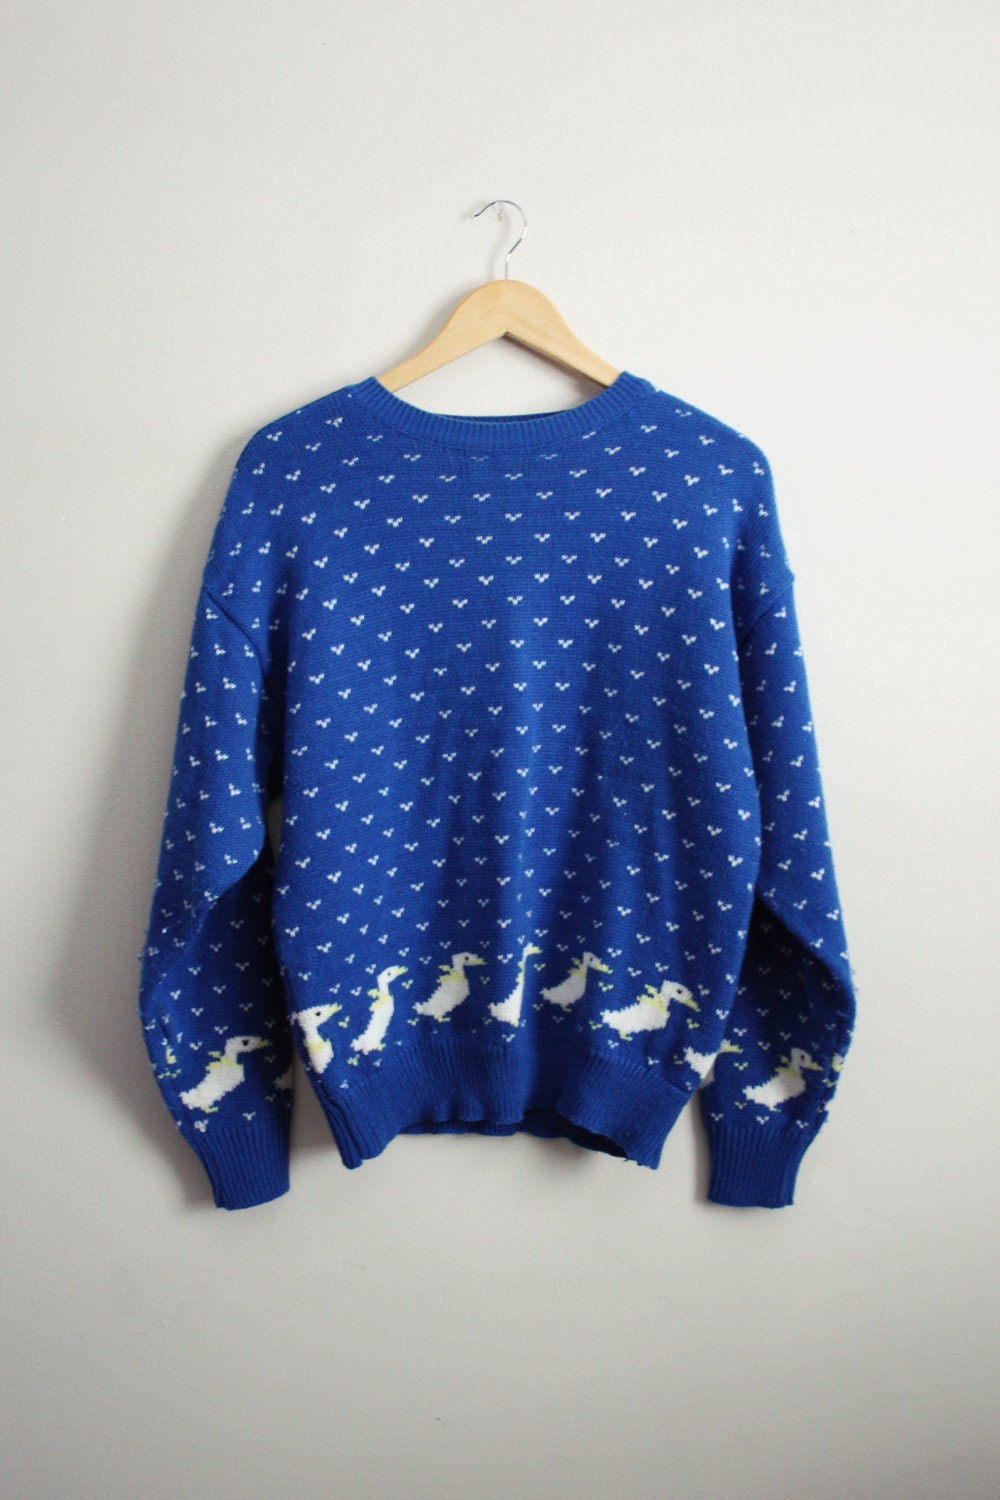 Vintage 80s Ducks in the sky Chunky knit Sweater. Size L/XL